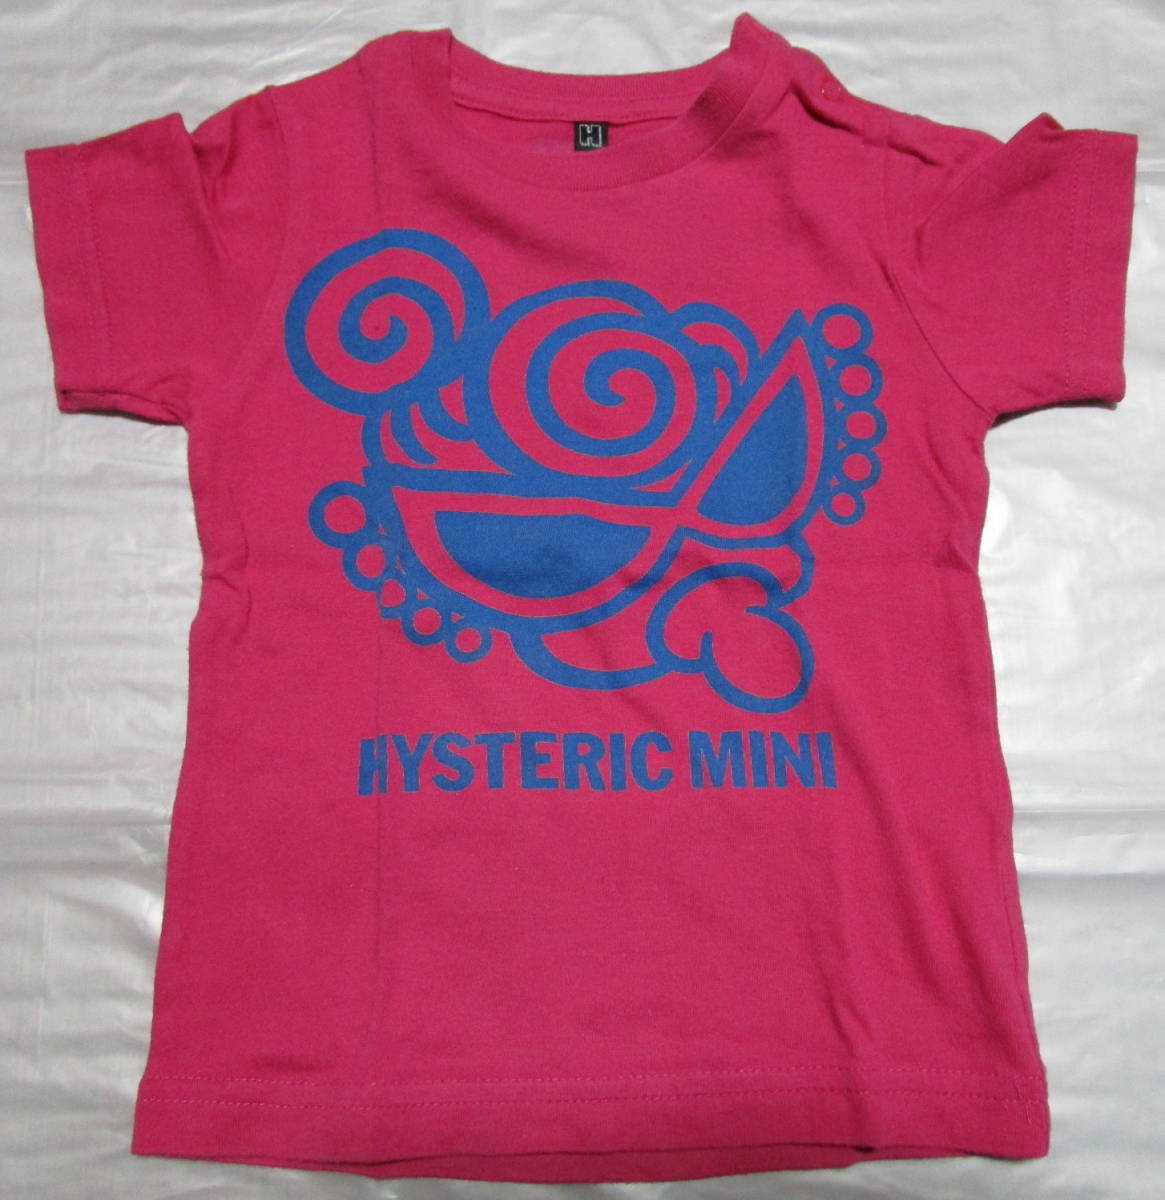 HYSTERIC GLAMOUR/ HYSTERIC MINI MY FIRST HYSTERIC FANCLUB Mini & Mom Tee ヒステリックミニ ヒスミニ ミニ&マム 半袖Tシャツ ピンク 80_画像1